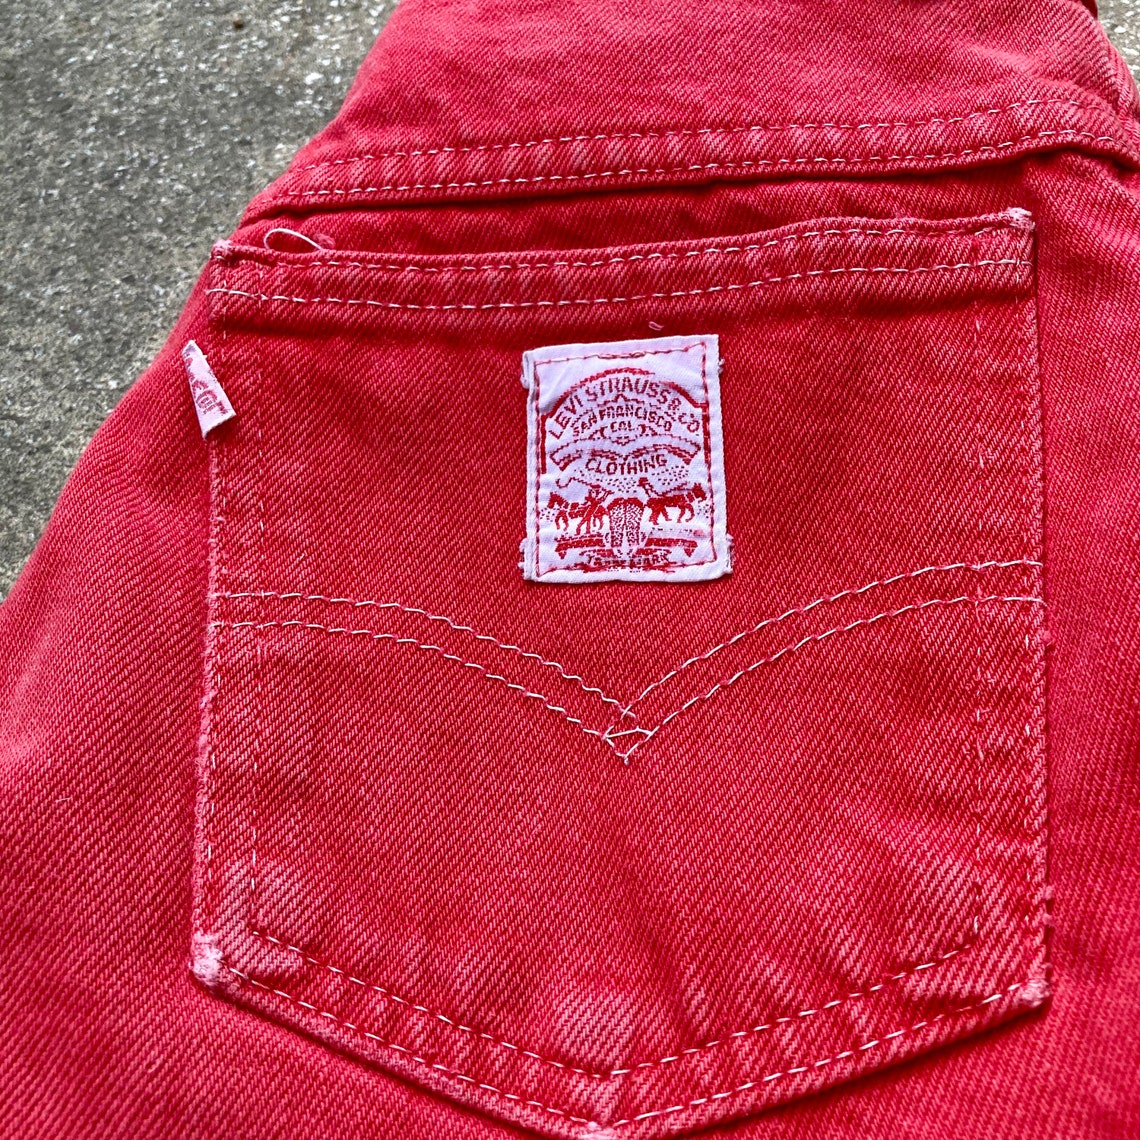 Vintage 80s Rare Red Levis White Patch Small | Etsy